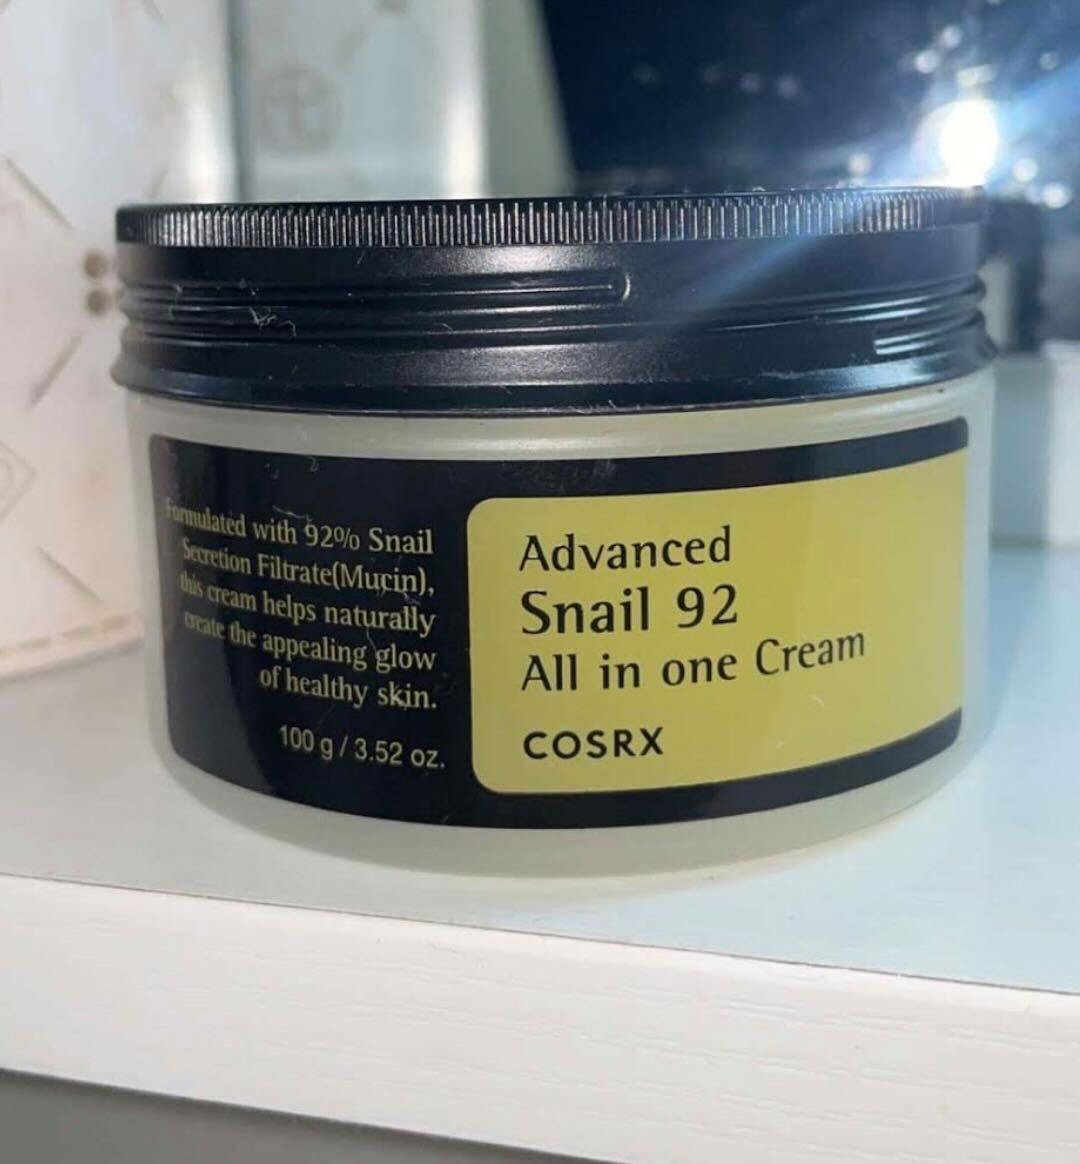 Dont be fooled — this Snail 92 advanced skincare product from Cosrx is the real deal, but it can be easy to get duped by scammers on the worlds biggest online retailer.